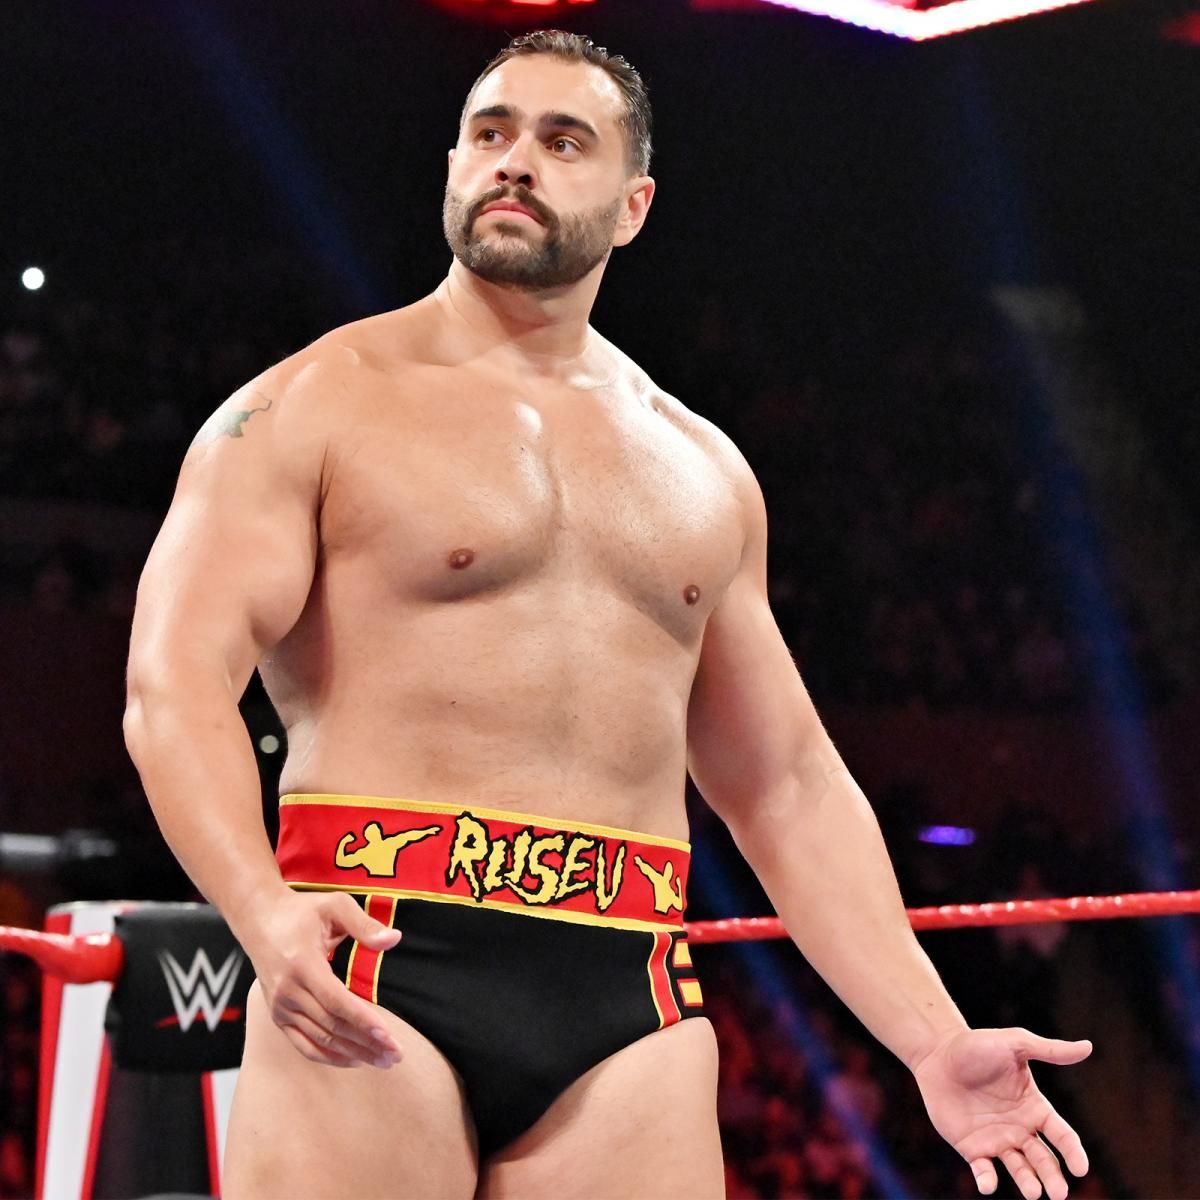 Former Wwe Superstar Rusev Announces He Has Covid 19